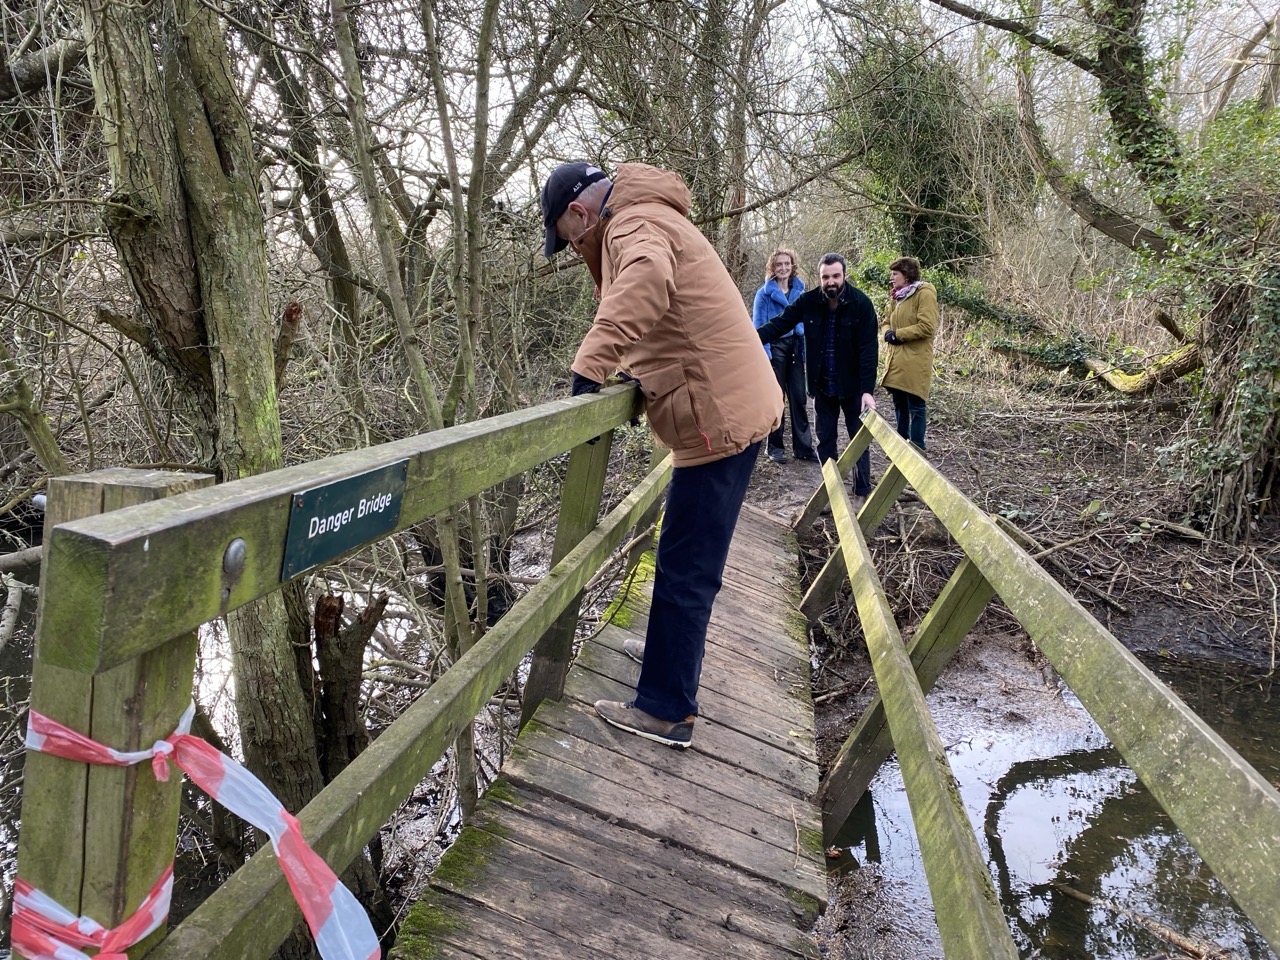 My dad crossing a bridge in Oxford which has tipped onto its side. The sign on it reads “Danger Bridge”. My family look on in horror.